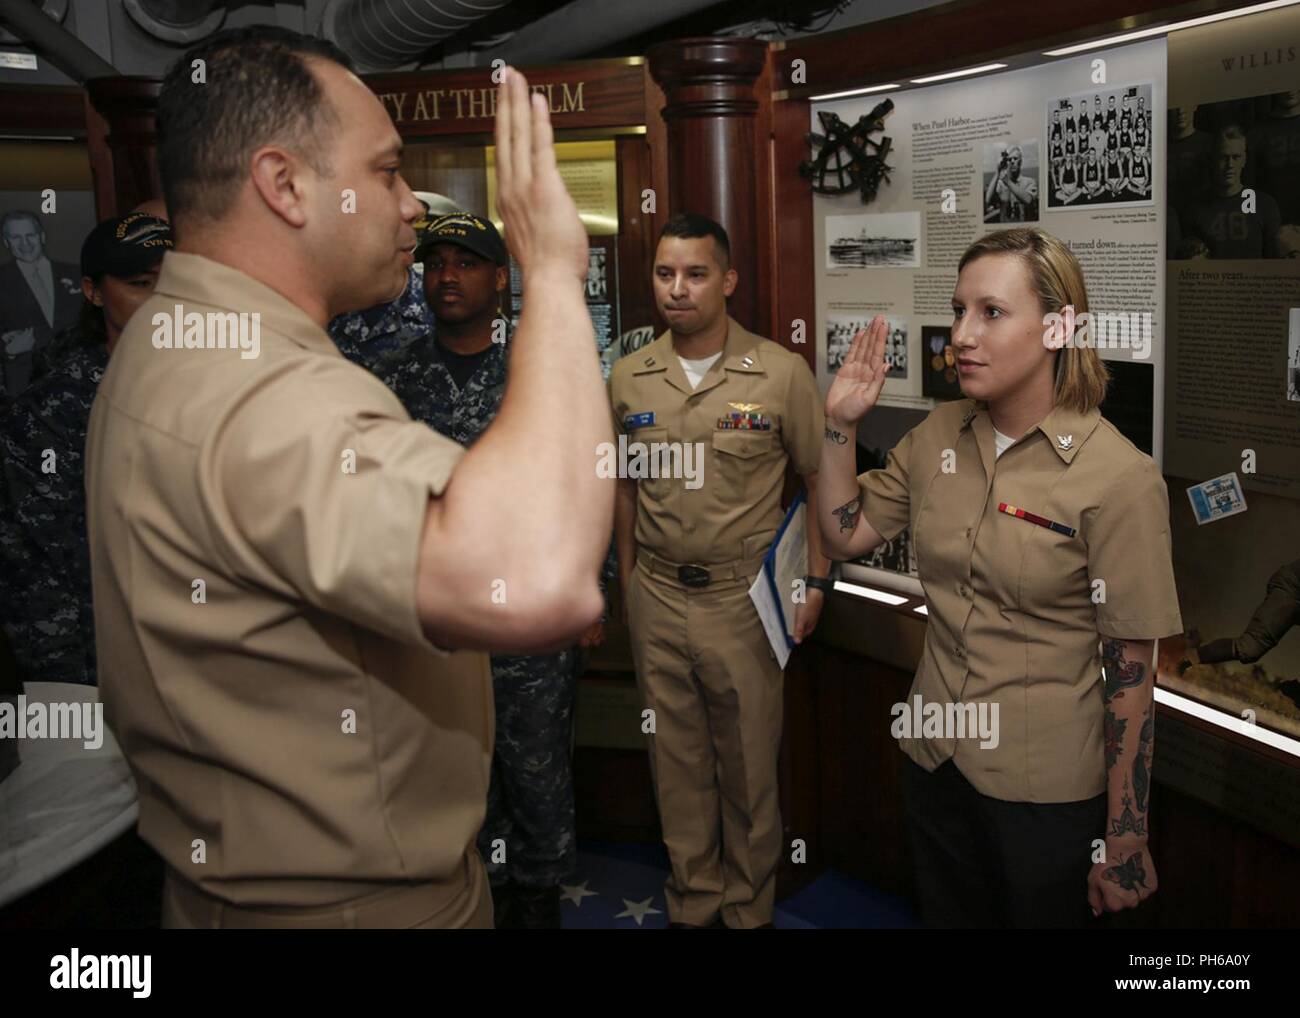 NORFOLK, Va. (June 29, 2018) Aviation Boatswain’s Mate (Fuel) 3rd Class Autumn Landrum, from Oak Ridge, Tennessee, assigned to USS Gerald R. Ford’s (CVN 78) air department, recites the oath of enlistment given by Chief Aviation Boatswain’s Mate (Fuel) Jorge Ramos during her reenlistment ceremony in the ship’s tribute room. Stock Photo